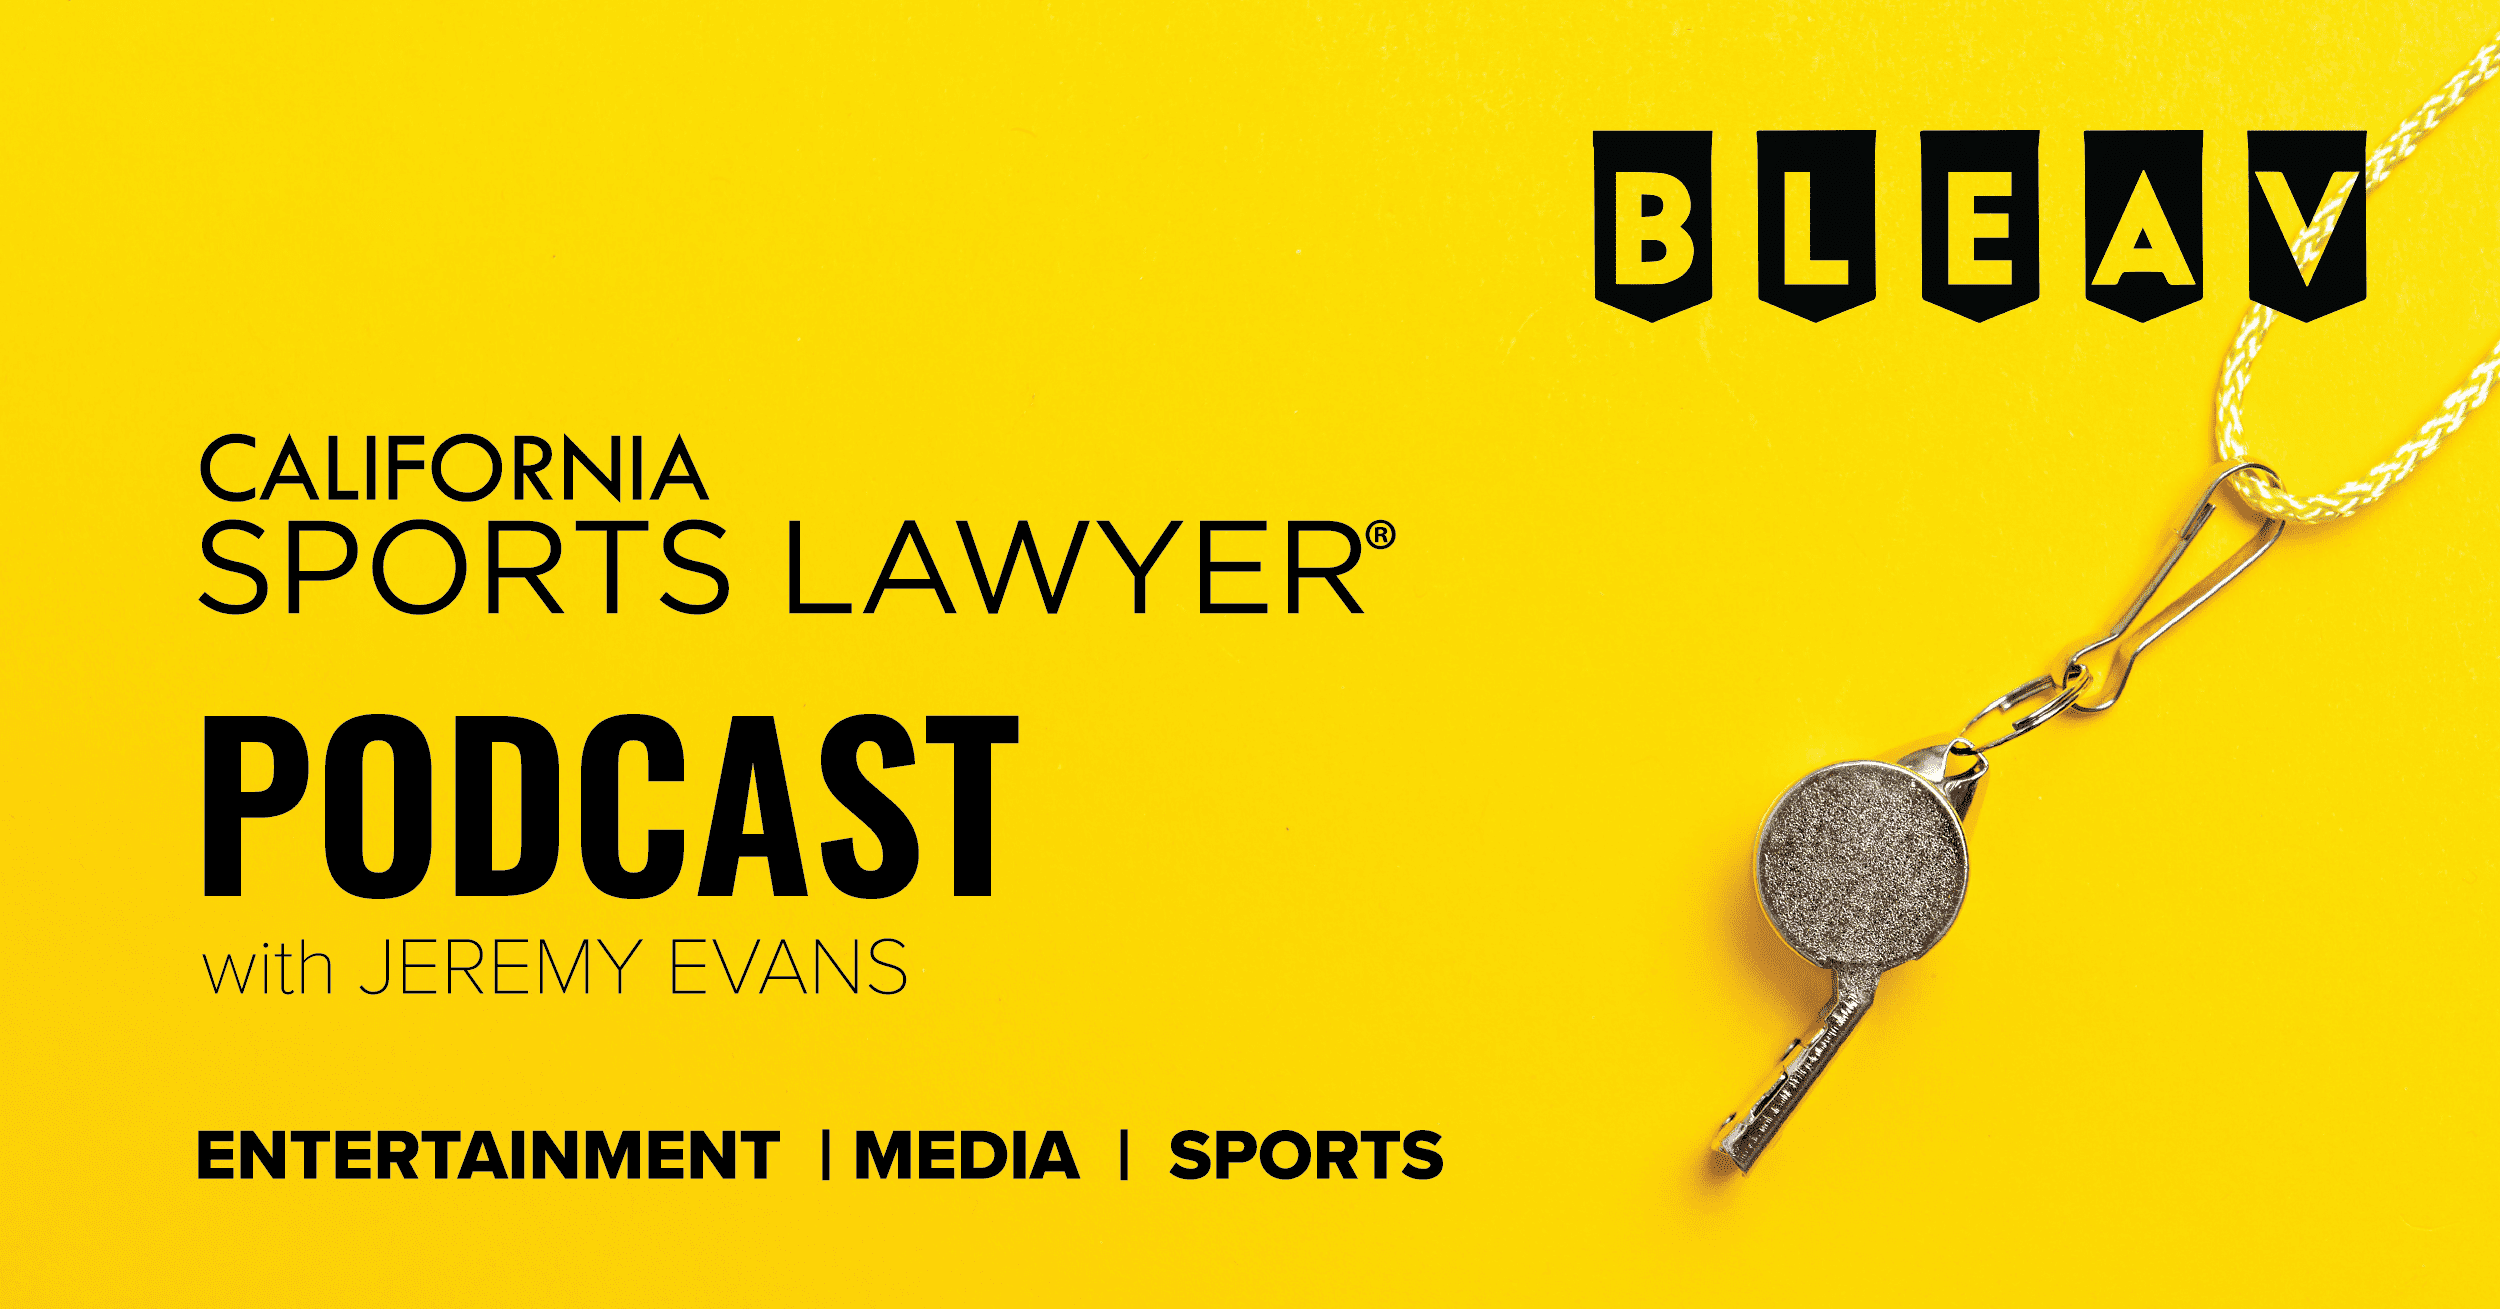 California Sports Lawyer® Podcast with Jeremy Evans: TKO Might be the Future of the Entertainment, Media, and Sports Business